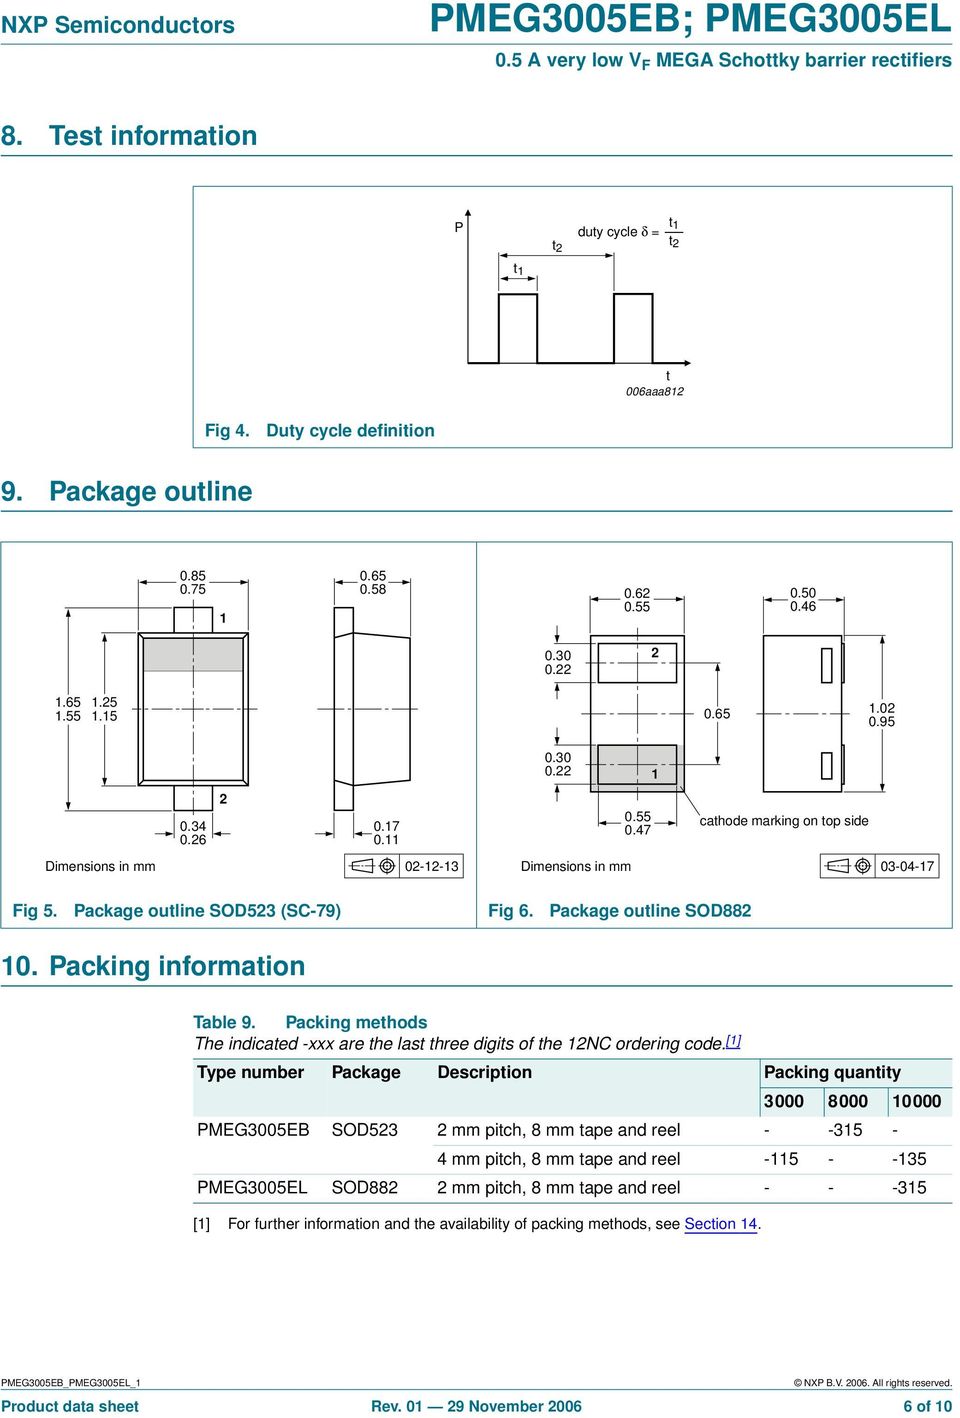 Packing information Table 9. Packing methods The indicated -xxx are the last three digits of the 2NC ordering code.